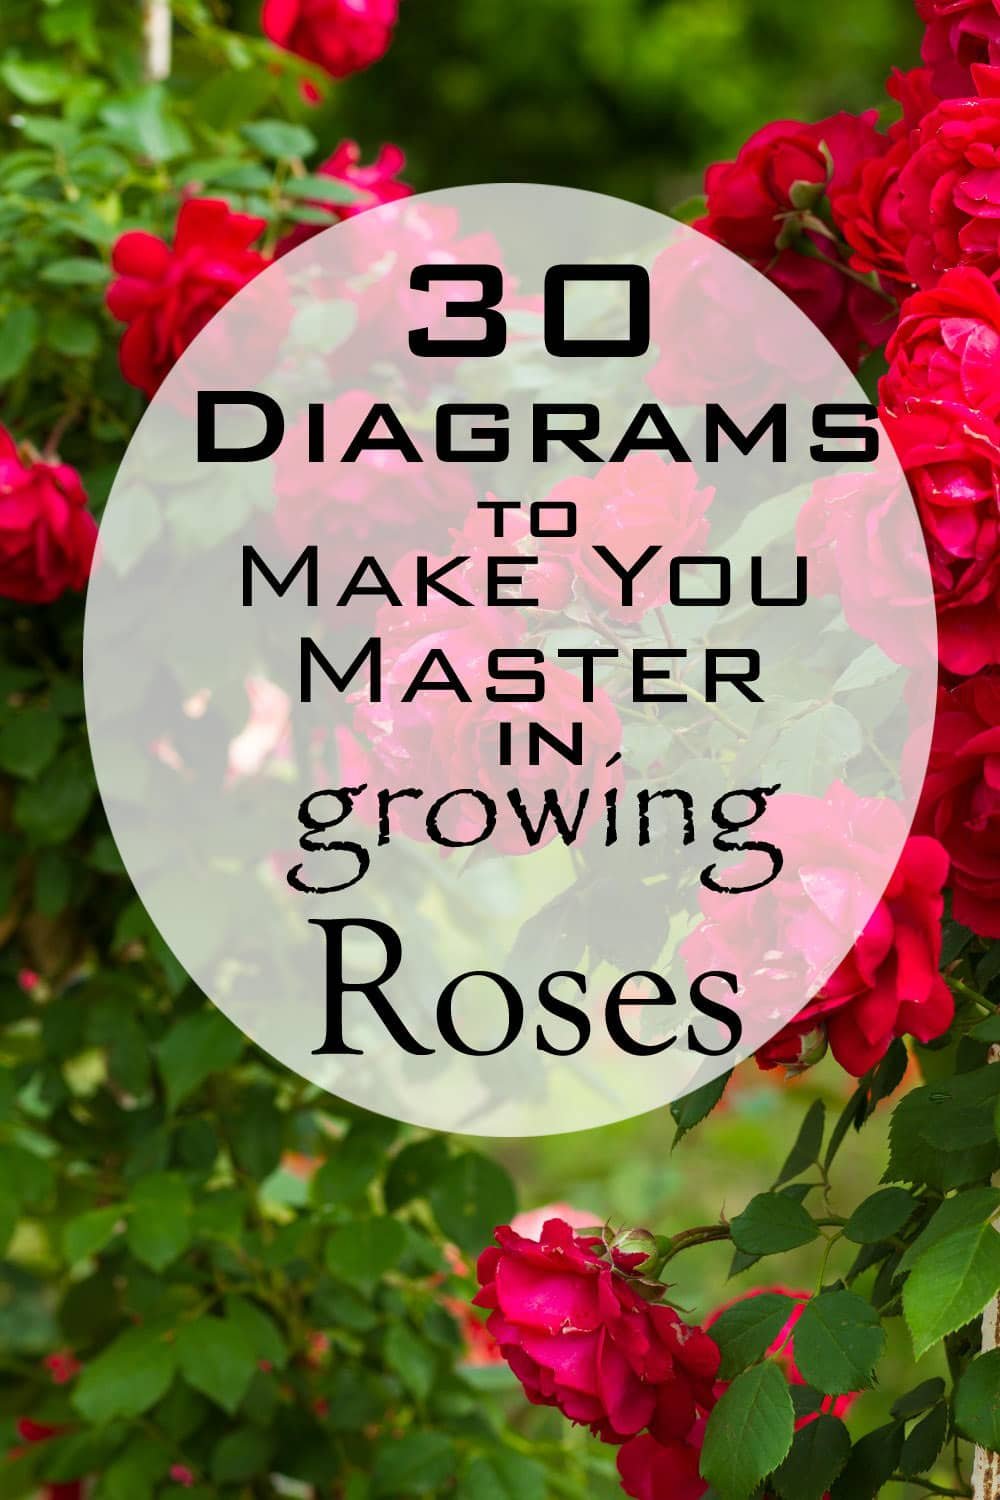 Whether you are a rosarian, a beginner or a serial rose killer, you will love these interesting, informative and fun illustrations that will teach you everything you need to know about growing roses.